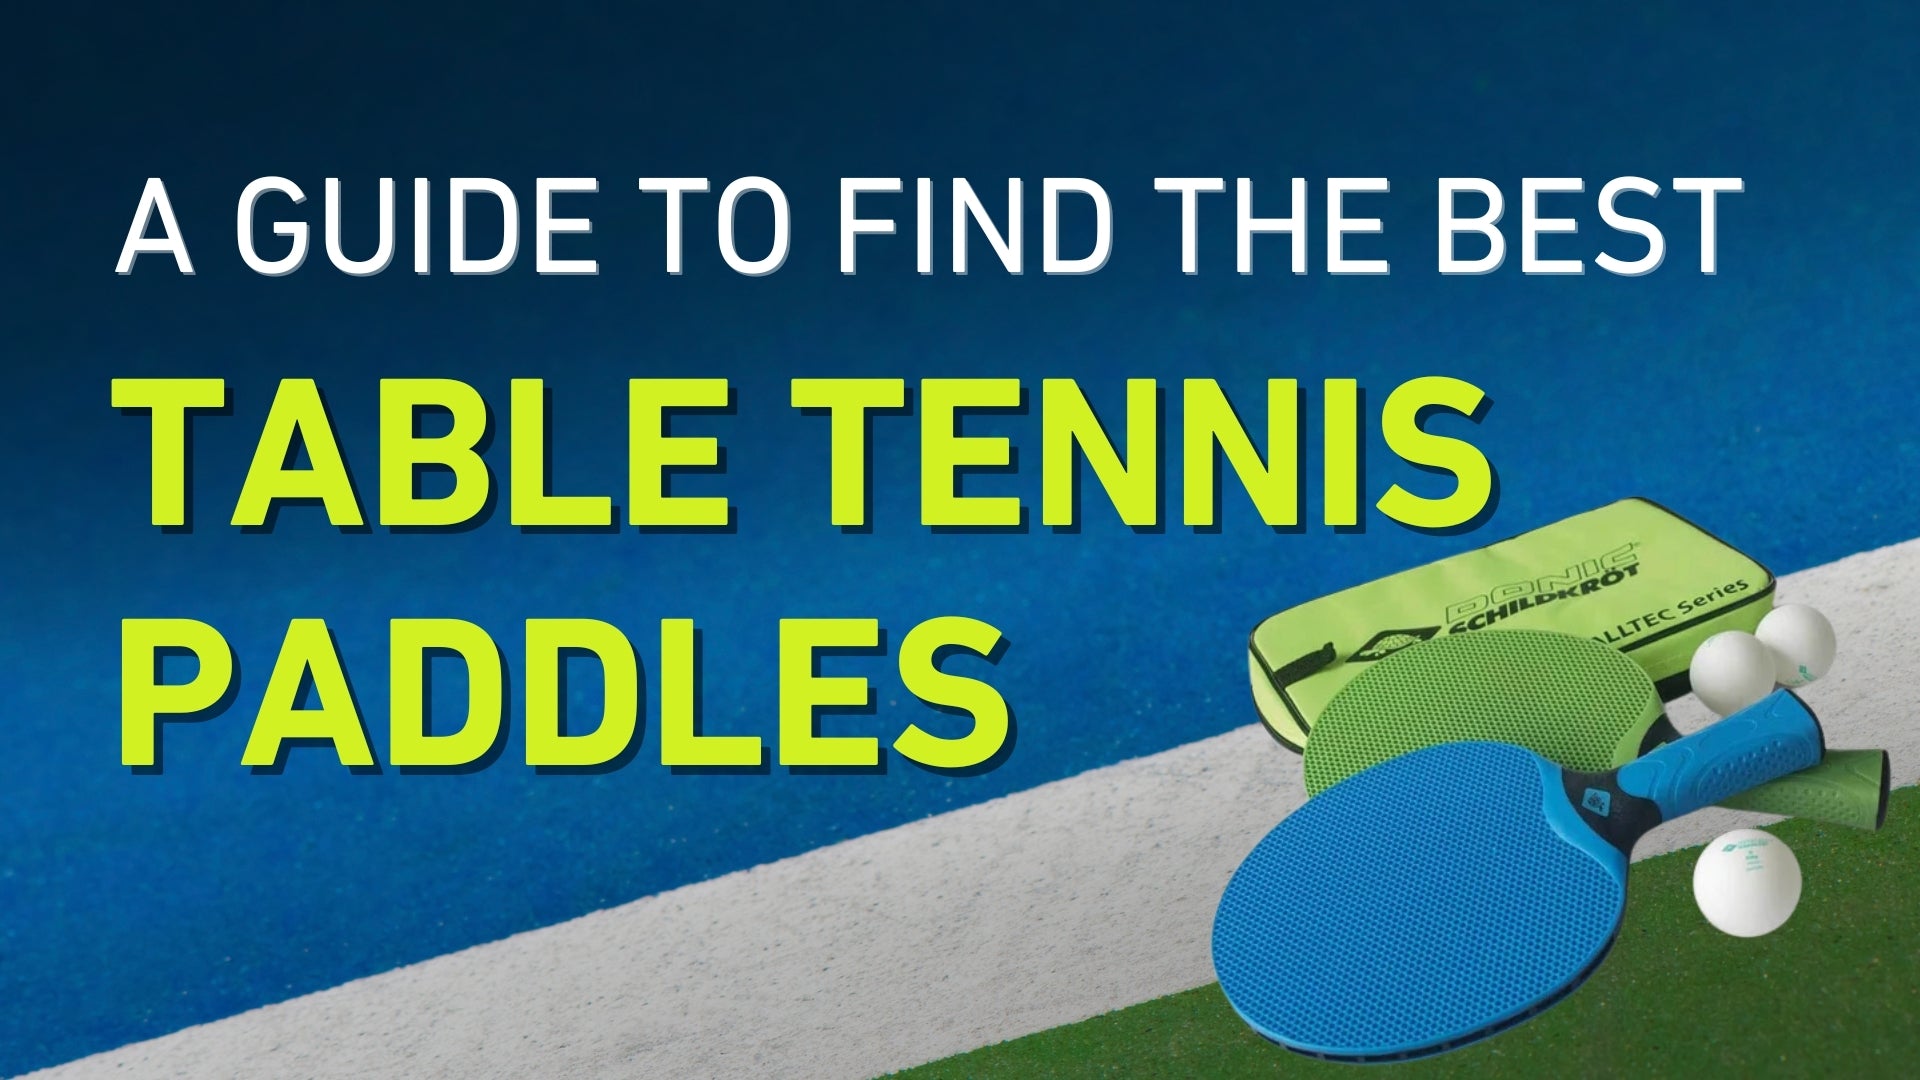 A Guide To Find The Best Table Tennis Paddles